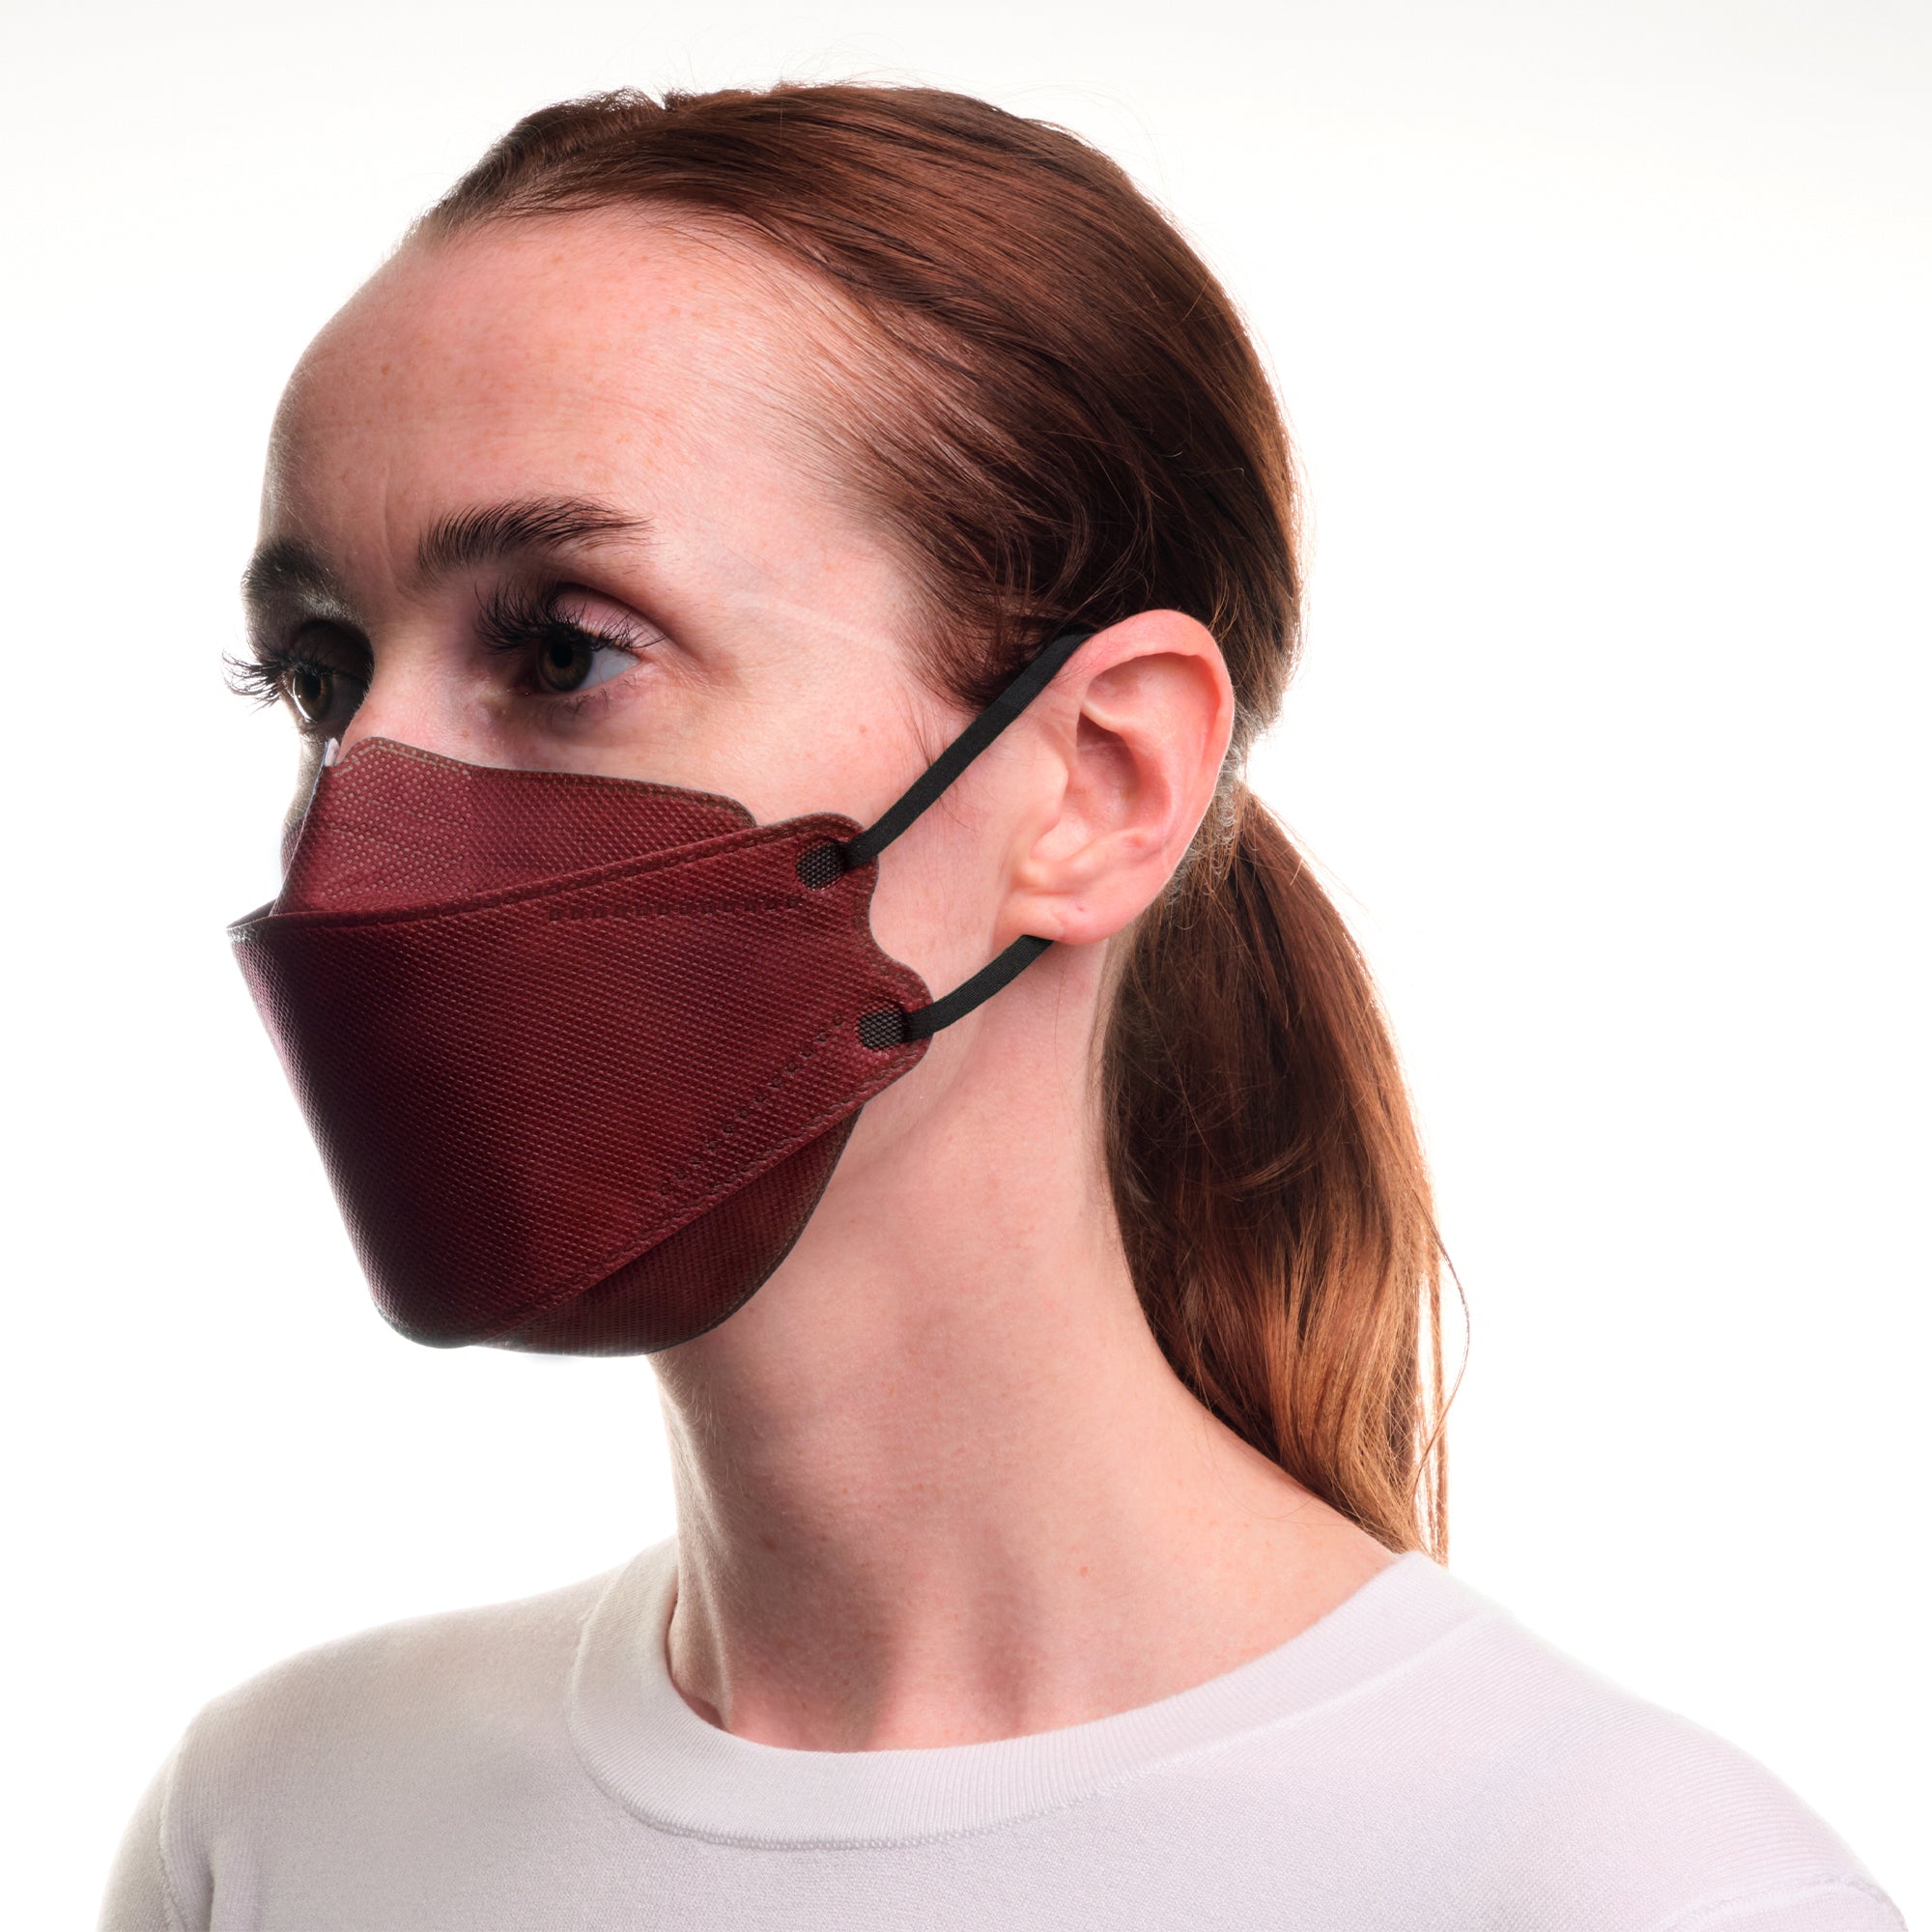 Kind KN95 Respirator Face Mask: The Rich Collection